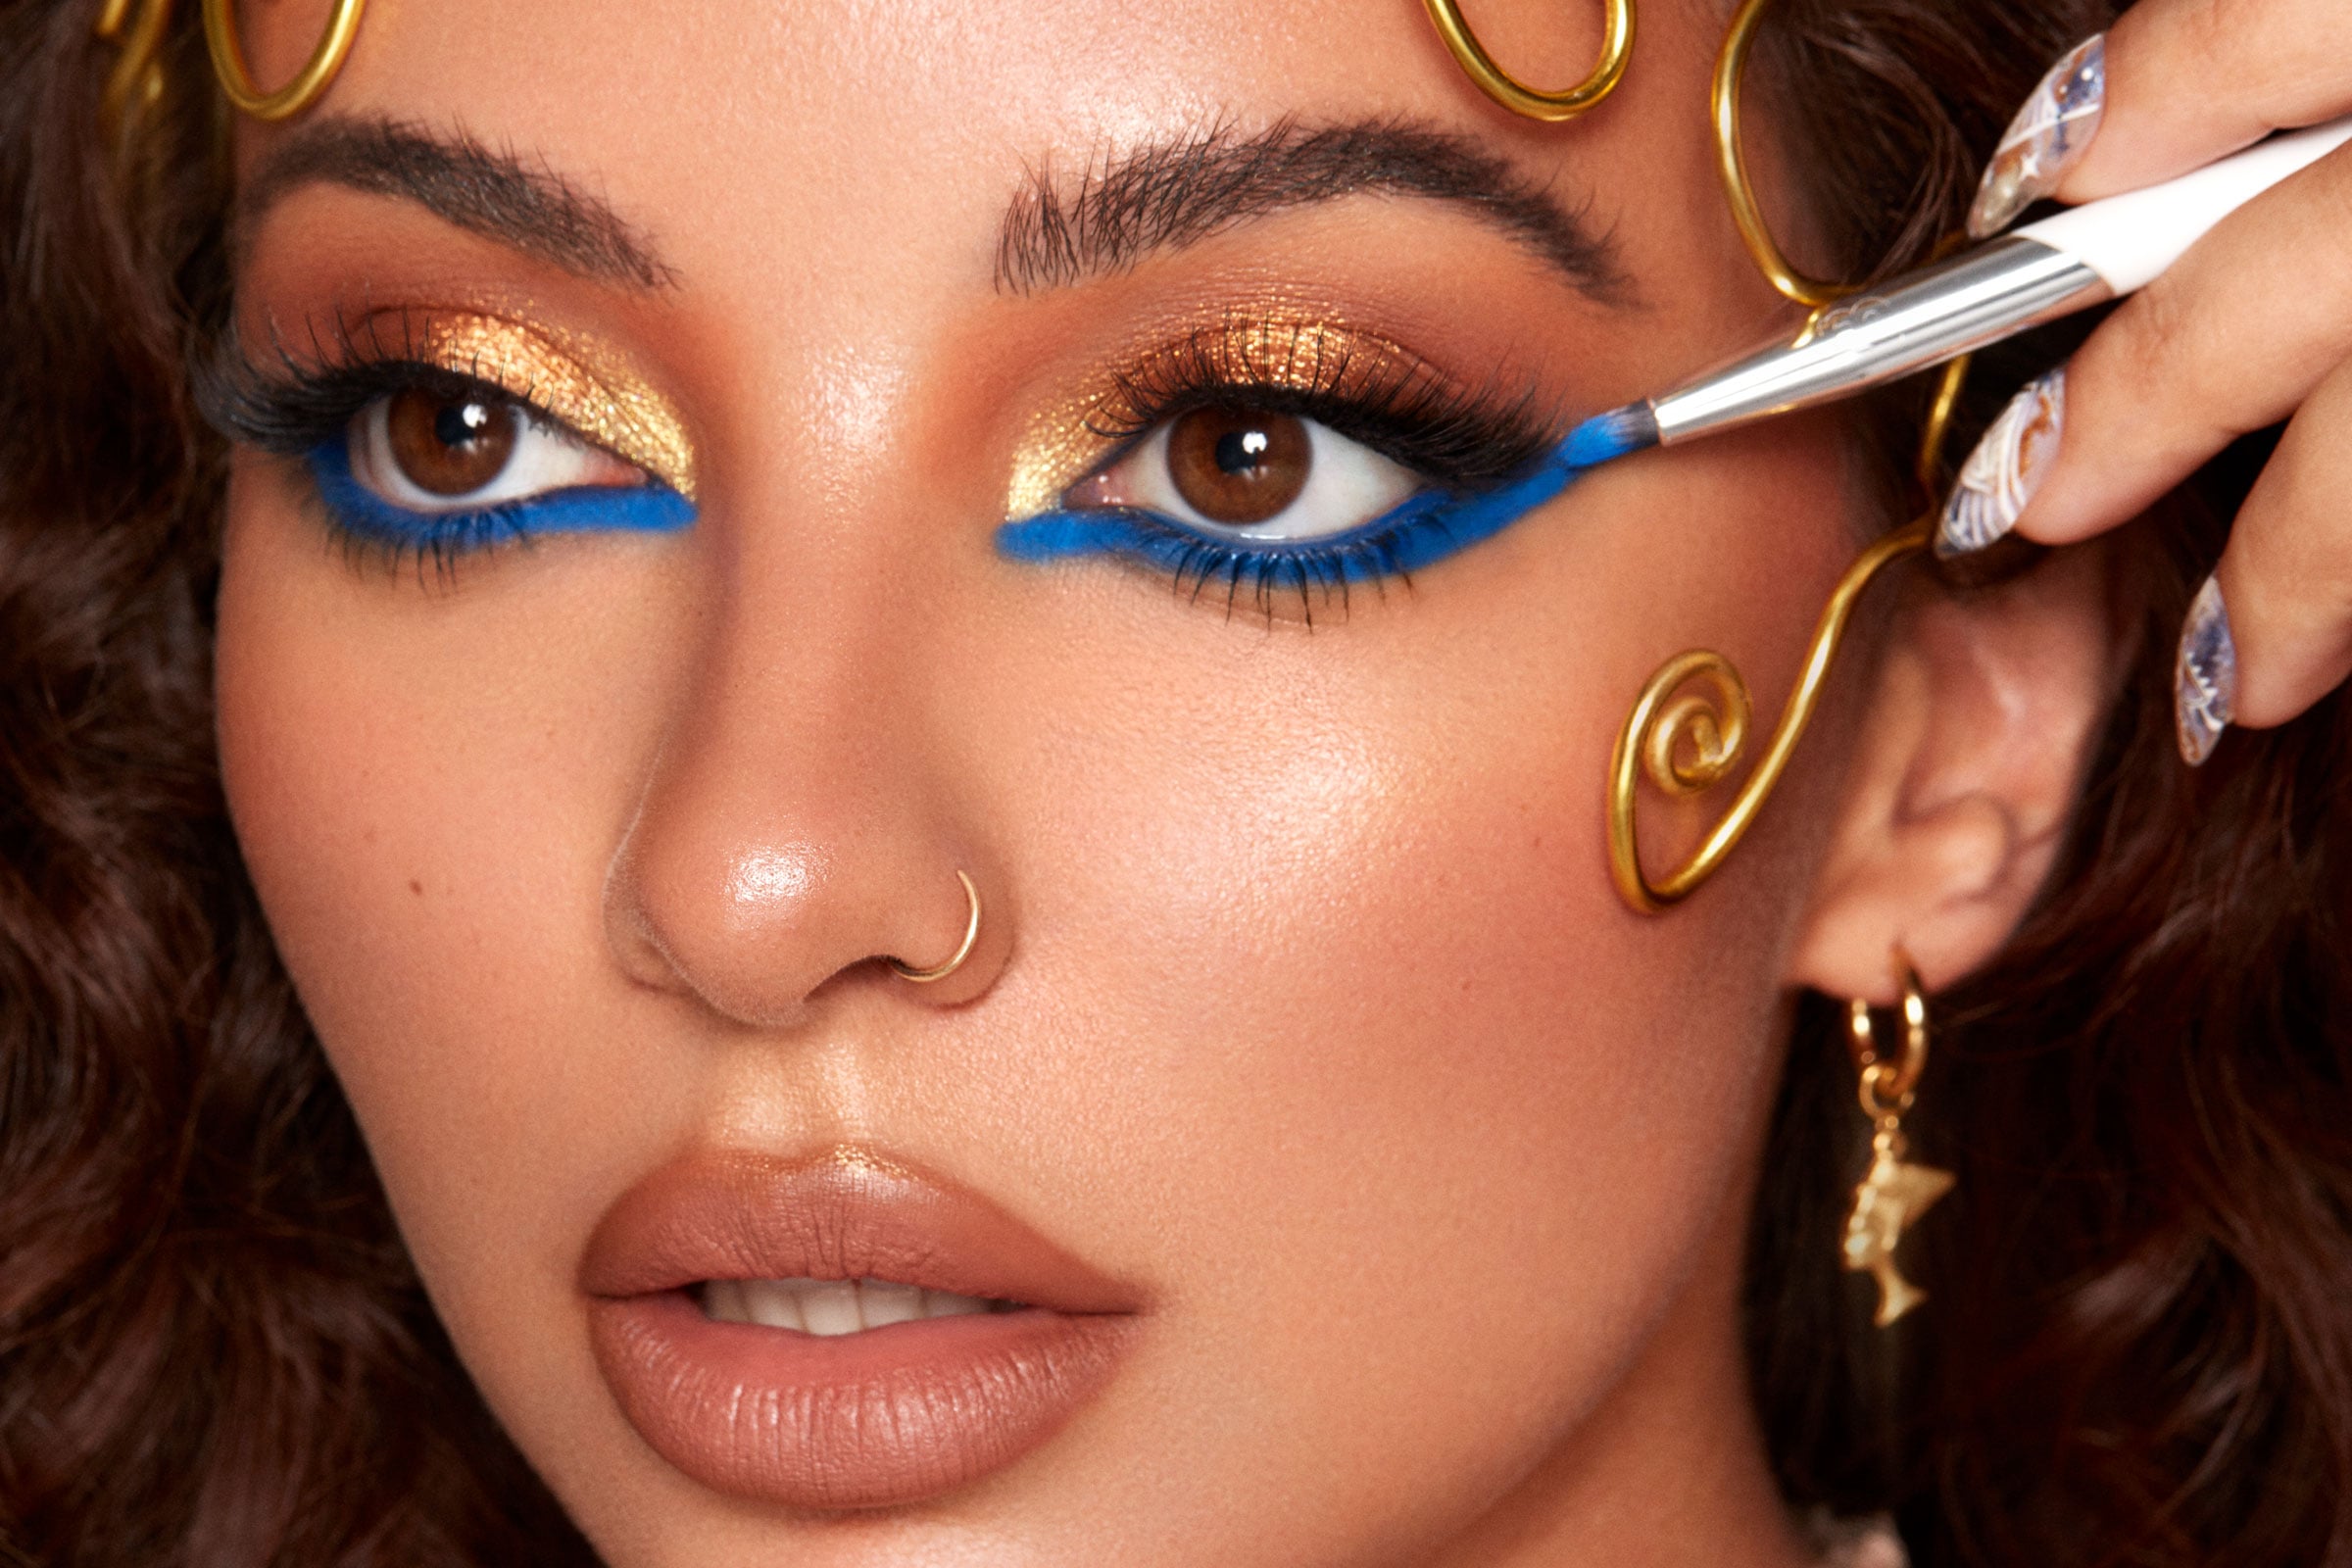 A Makeup Artist Invents the Mixing Palette We've Been Wanting All